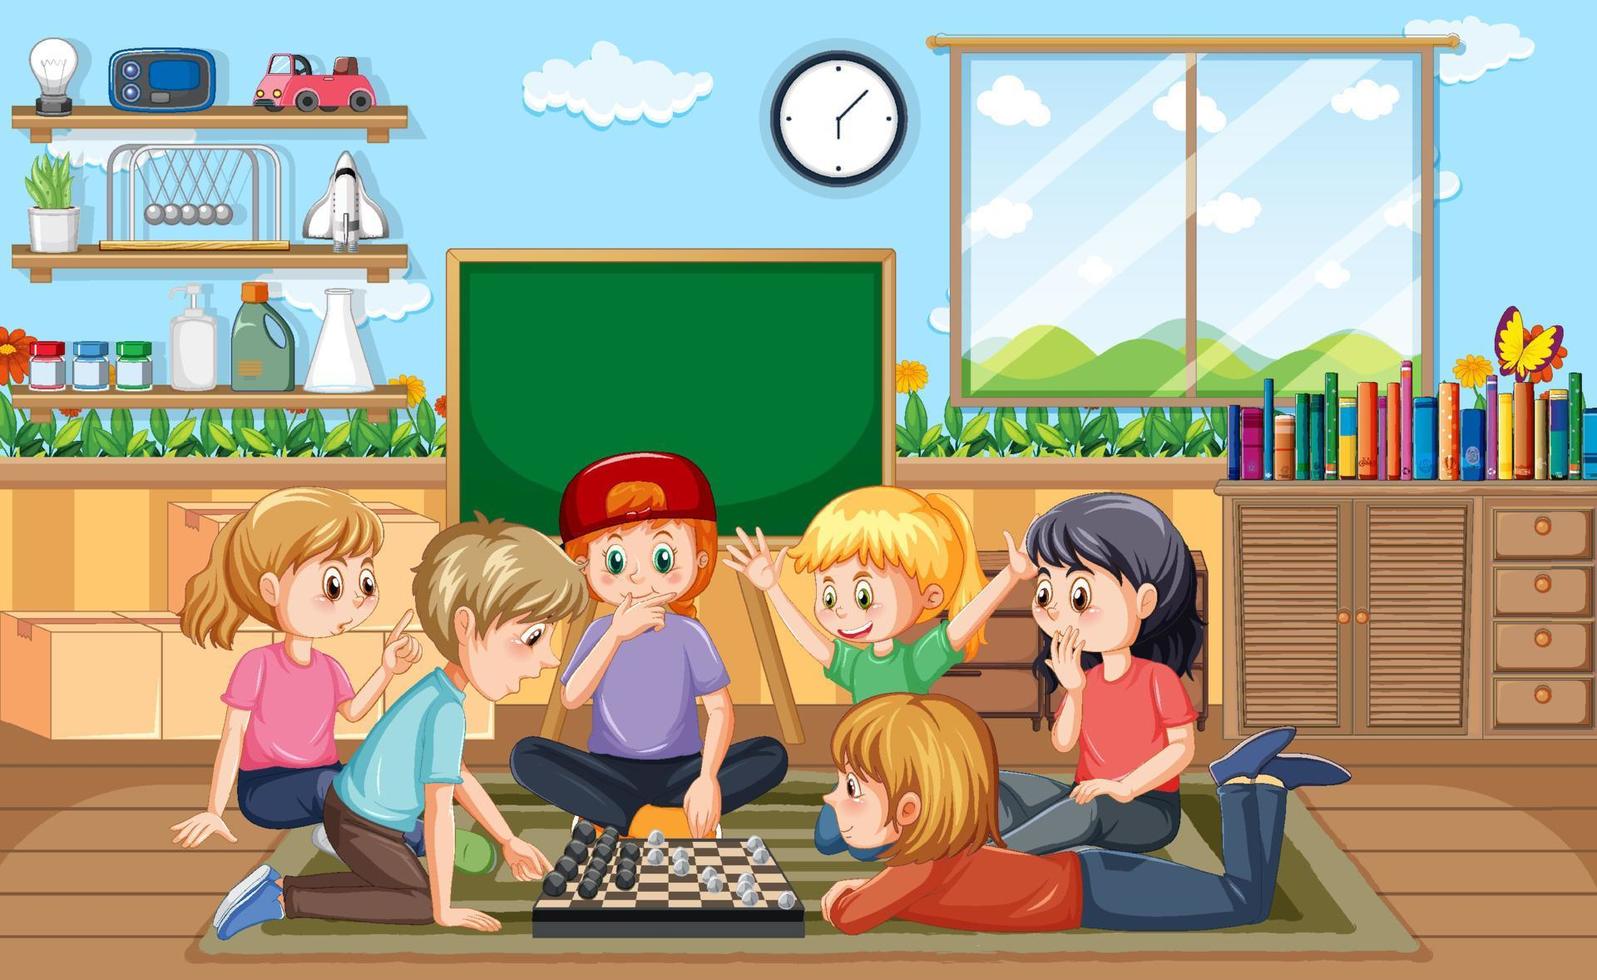 Children playing games in the room vector